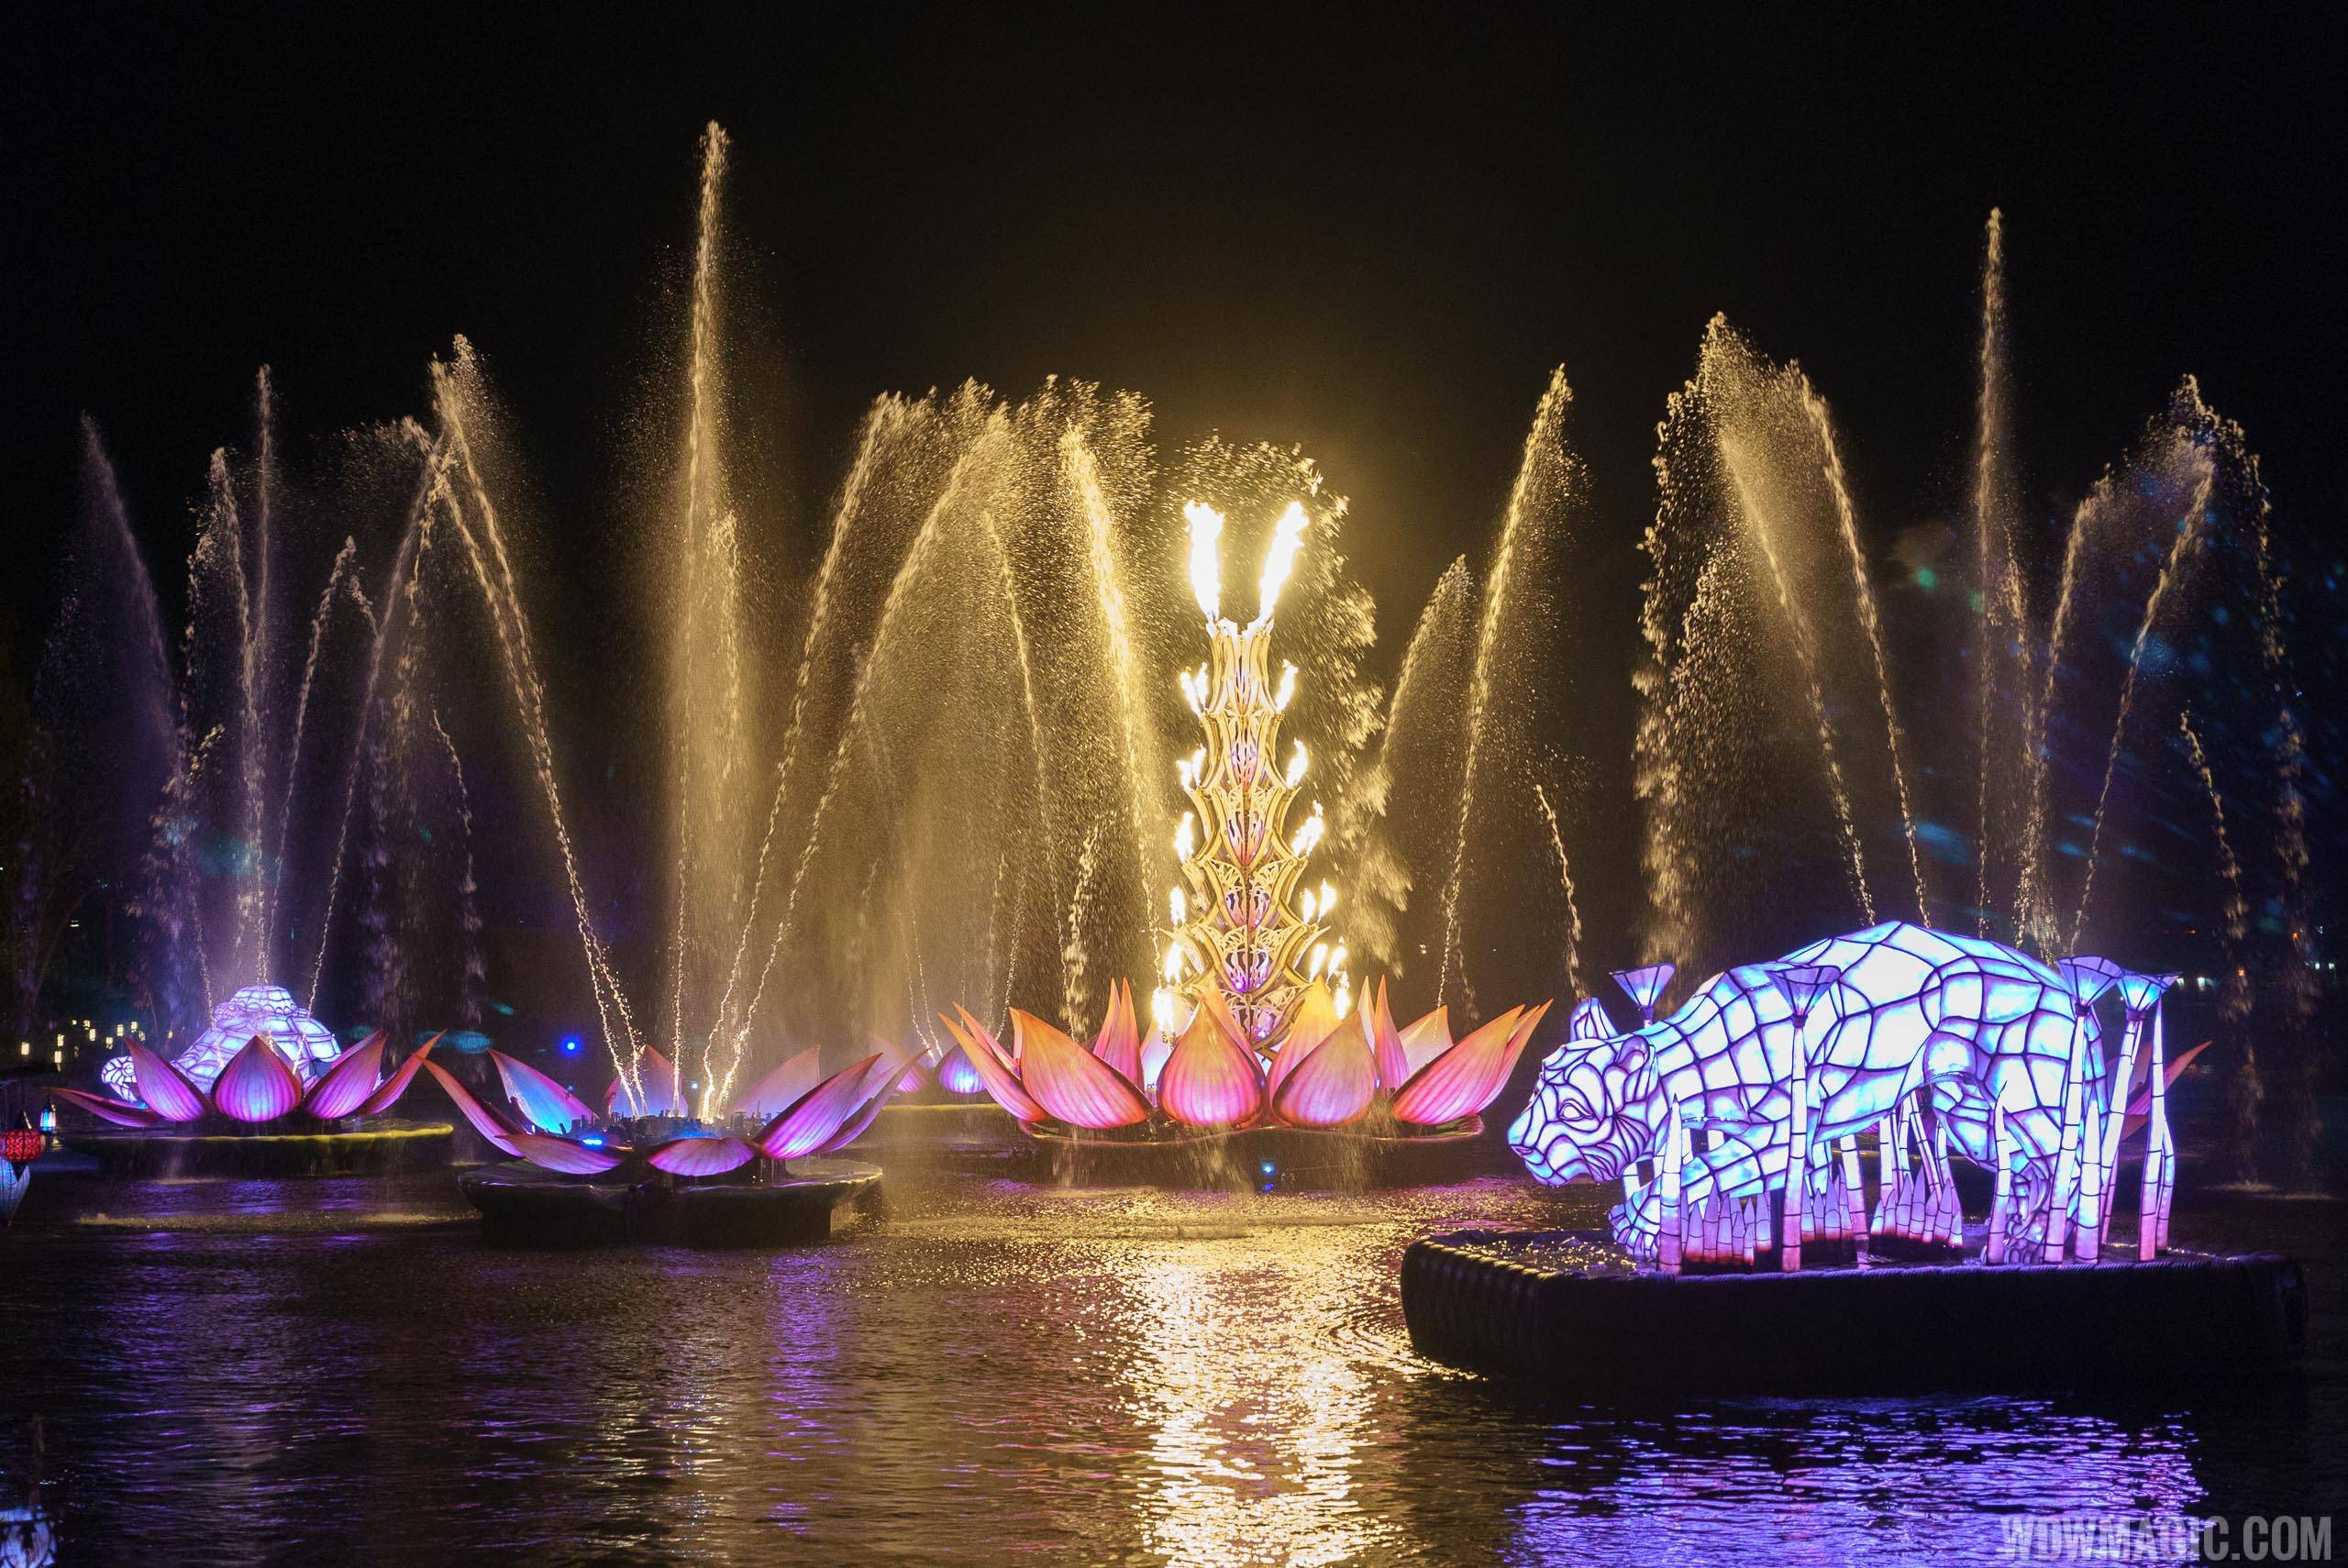 VIDEO - Disney reveals more about Rivers of Light at Disney's Animal Kingdom